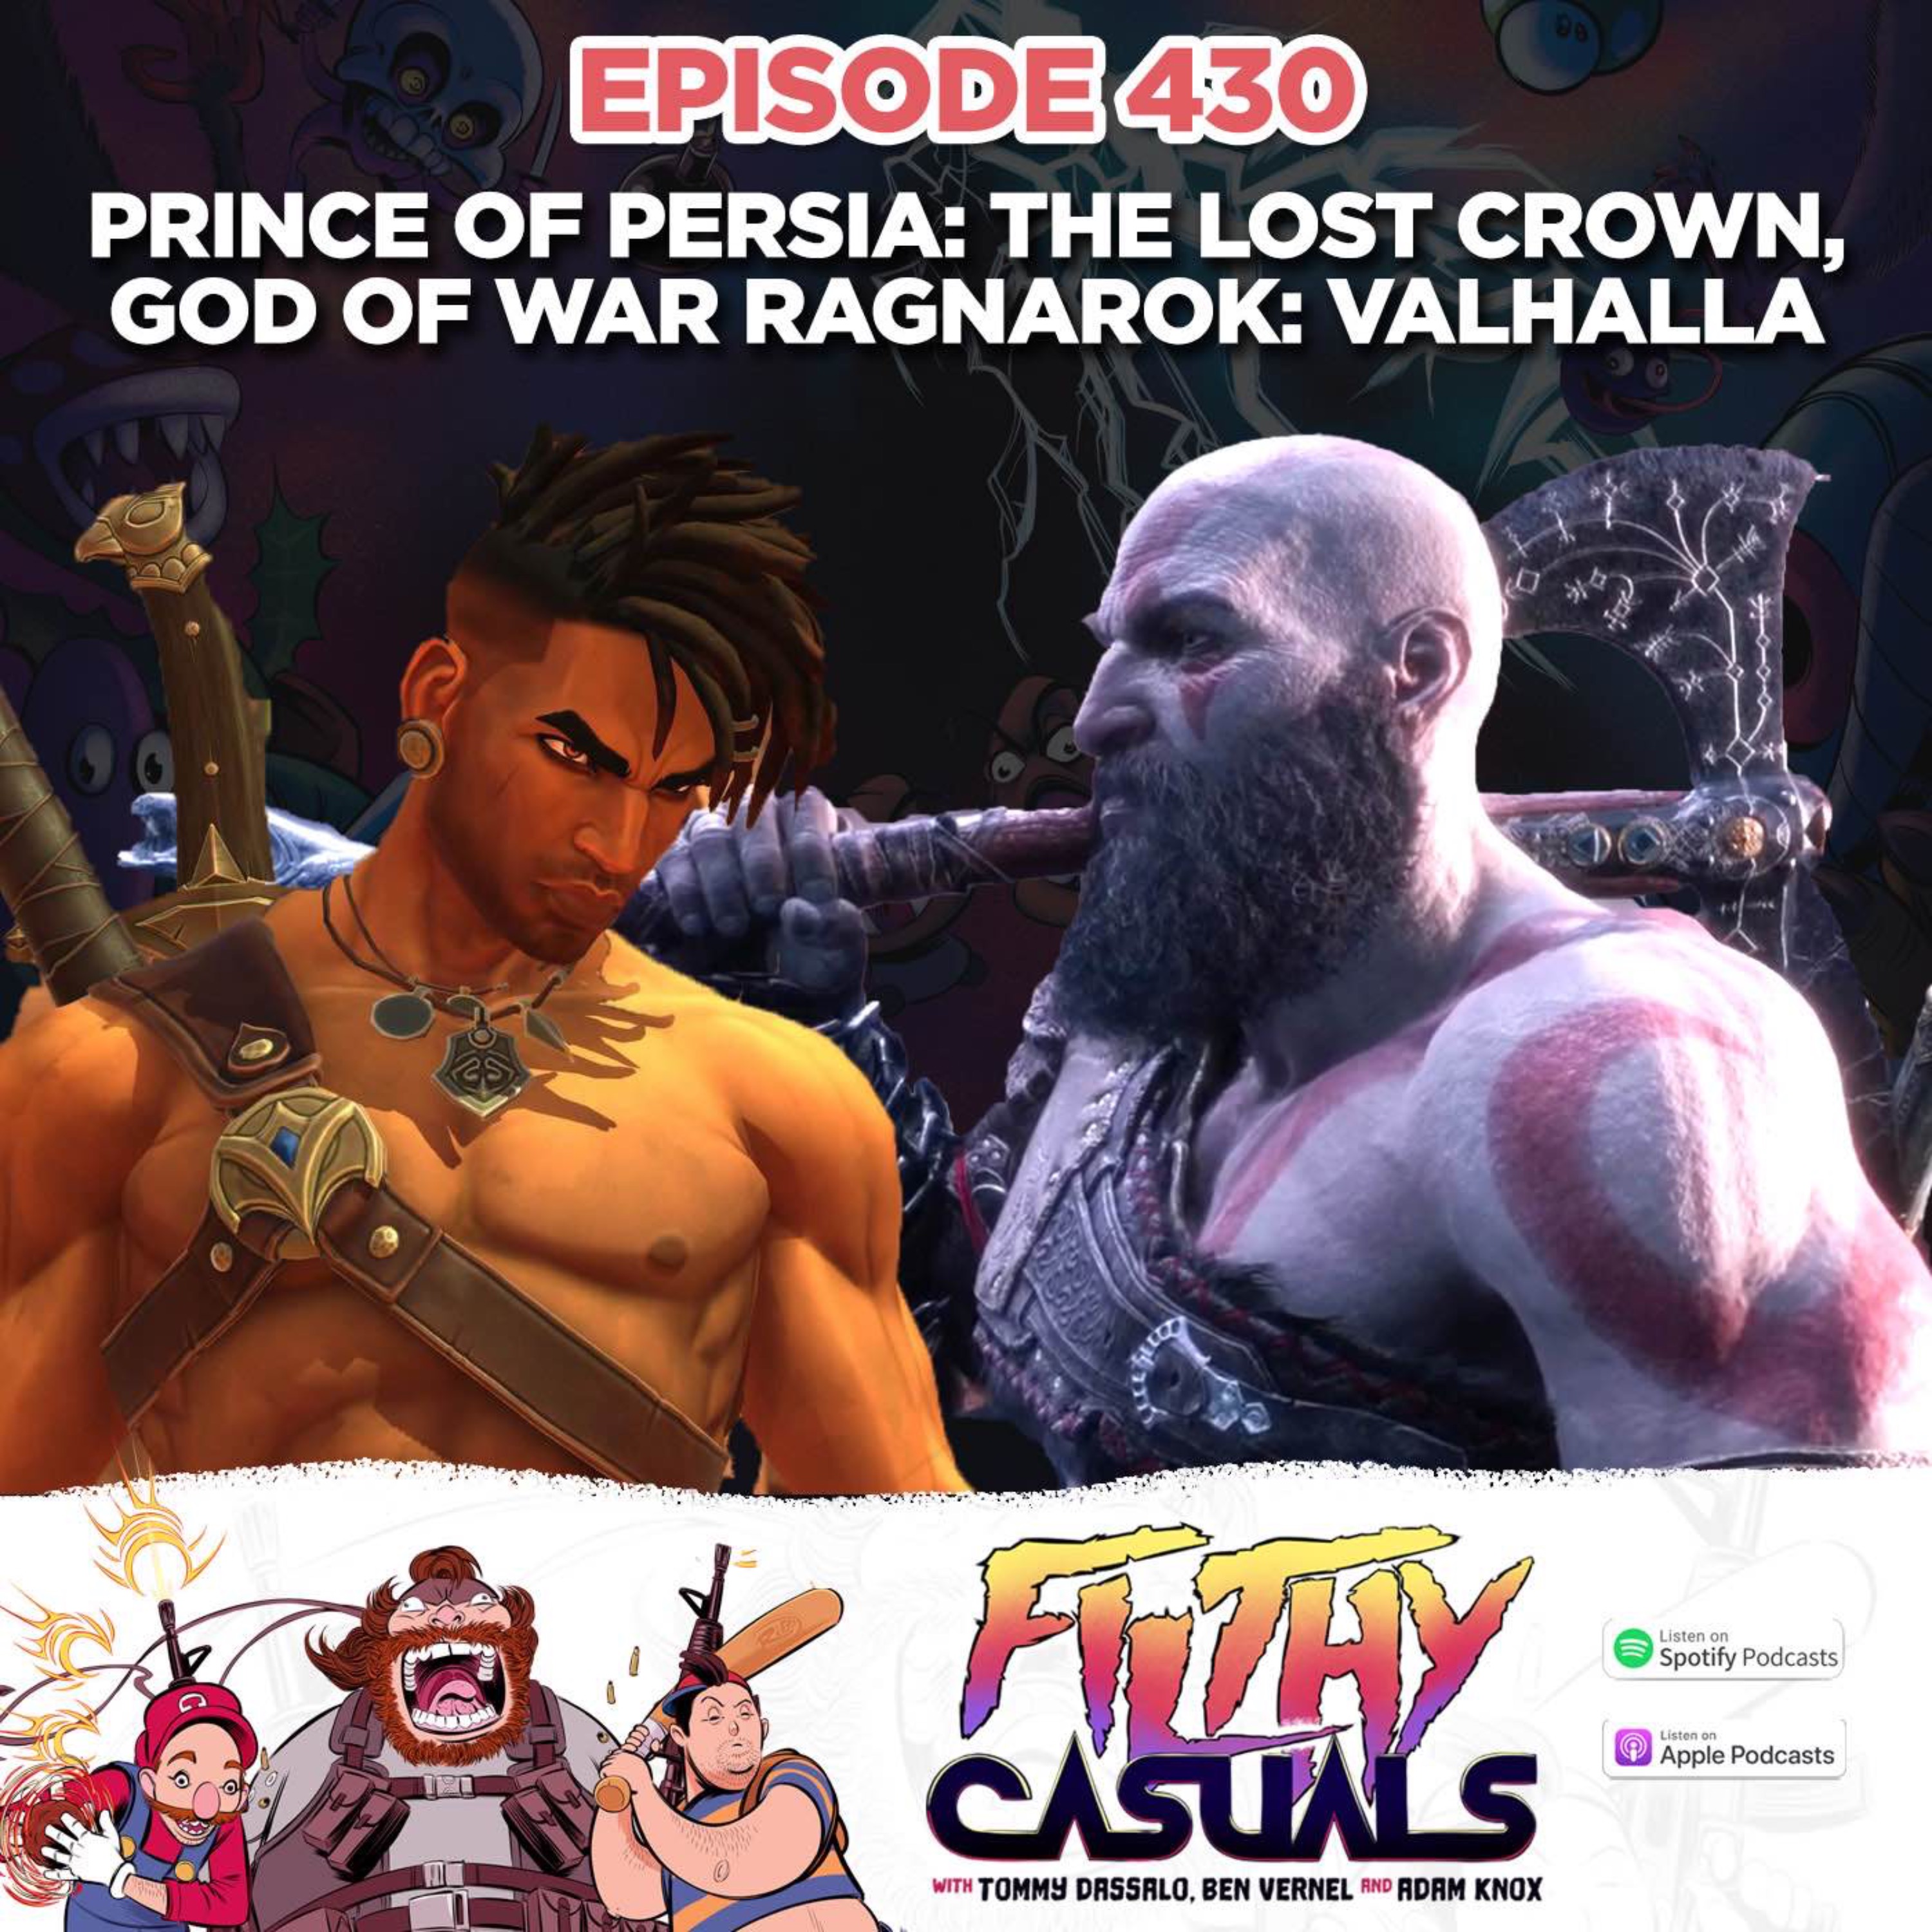 Episode 430: God of War Ragnarok: Valhalla, Prince of Persia: The Lost Crown Early Impressions